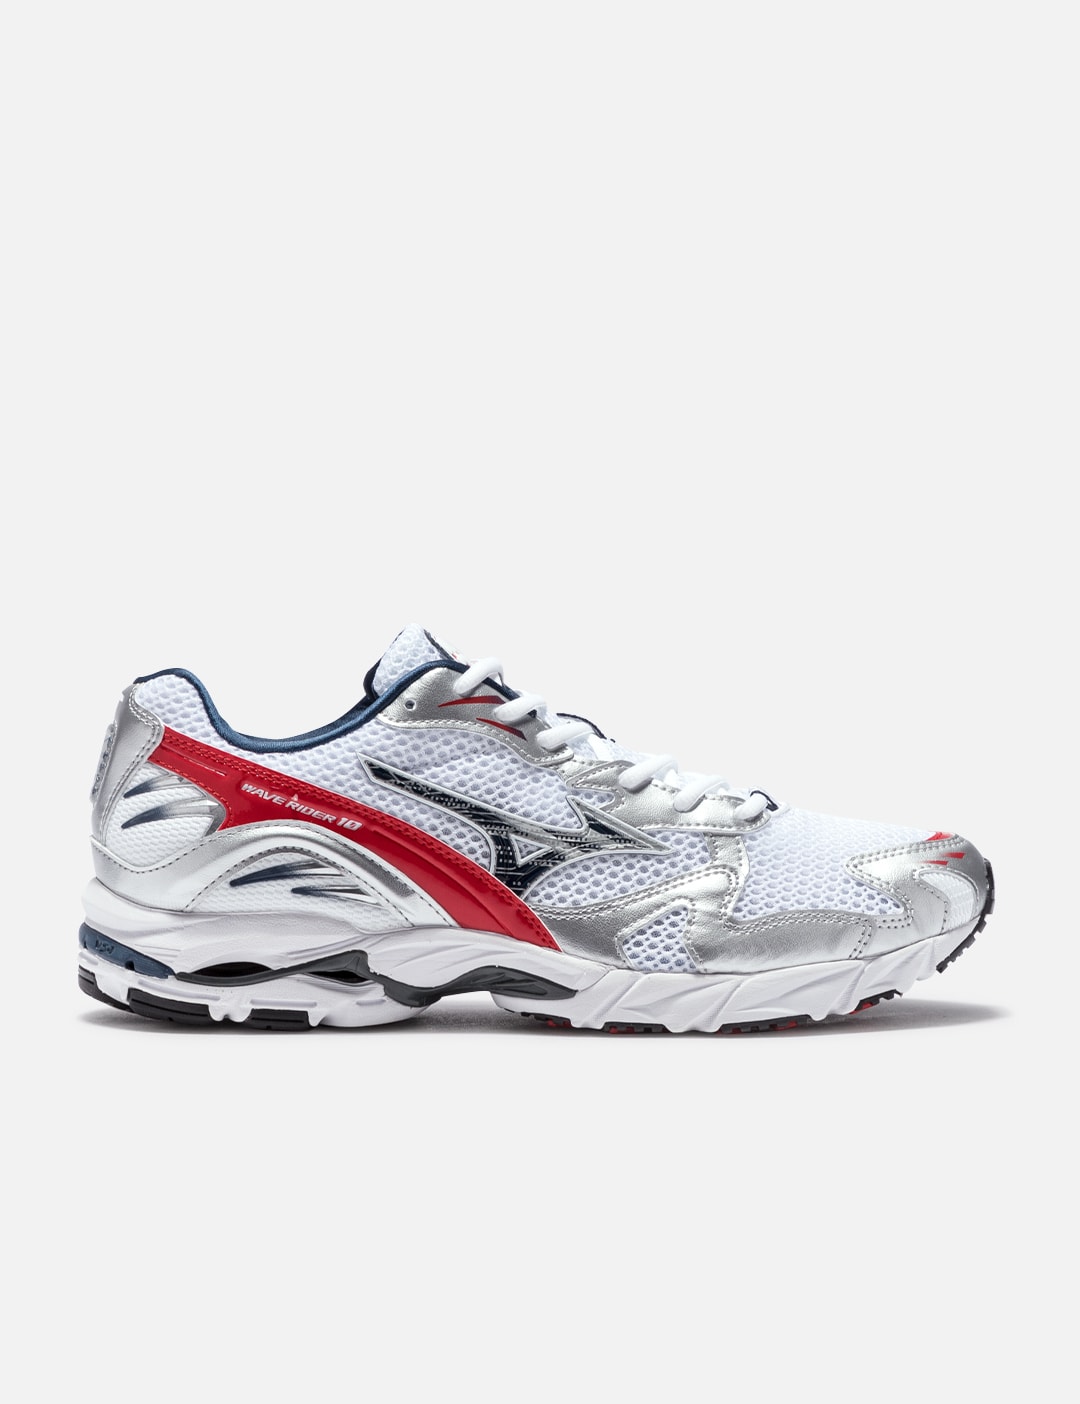 MIZUNO Wave | HBX - Globally Curated Fashion and Lifestyle by Hypebeast